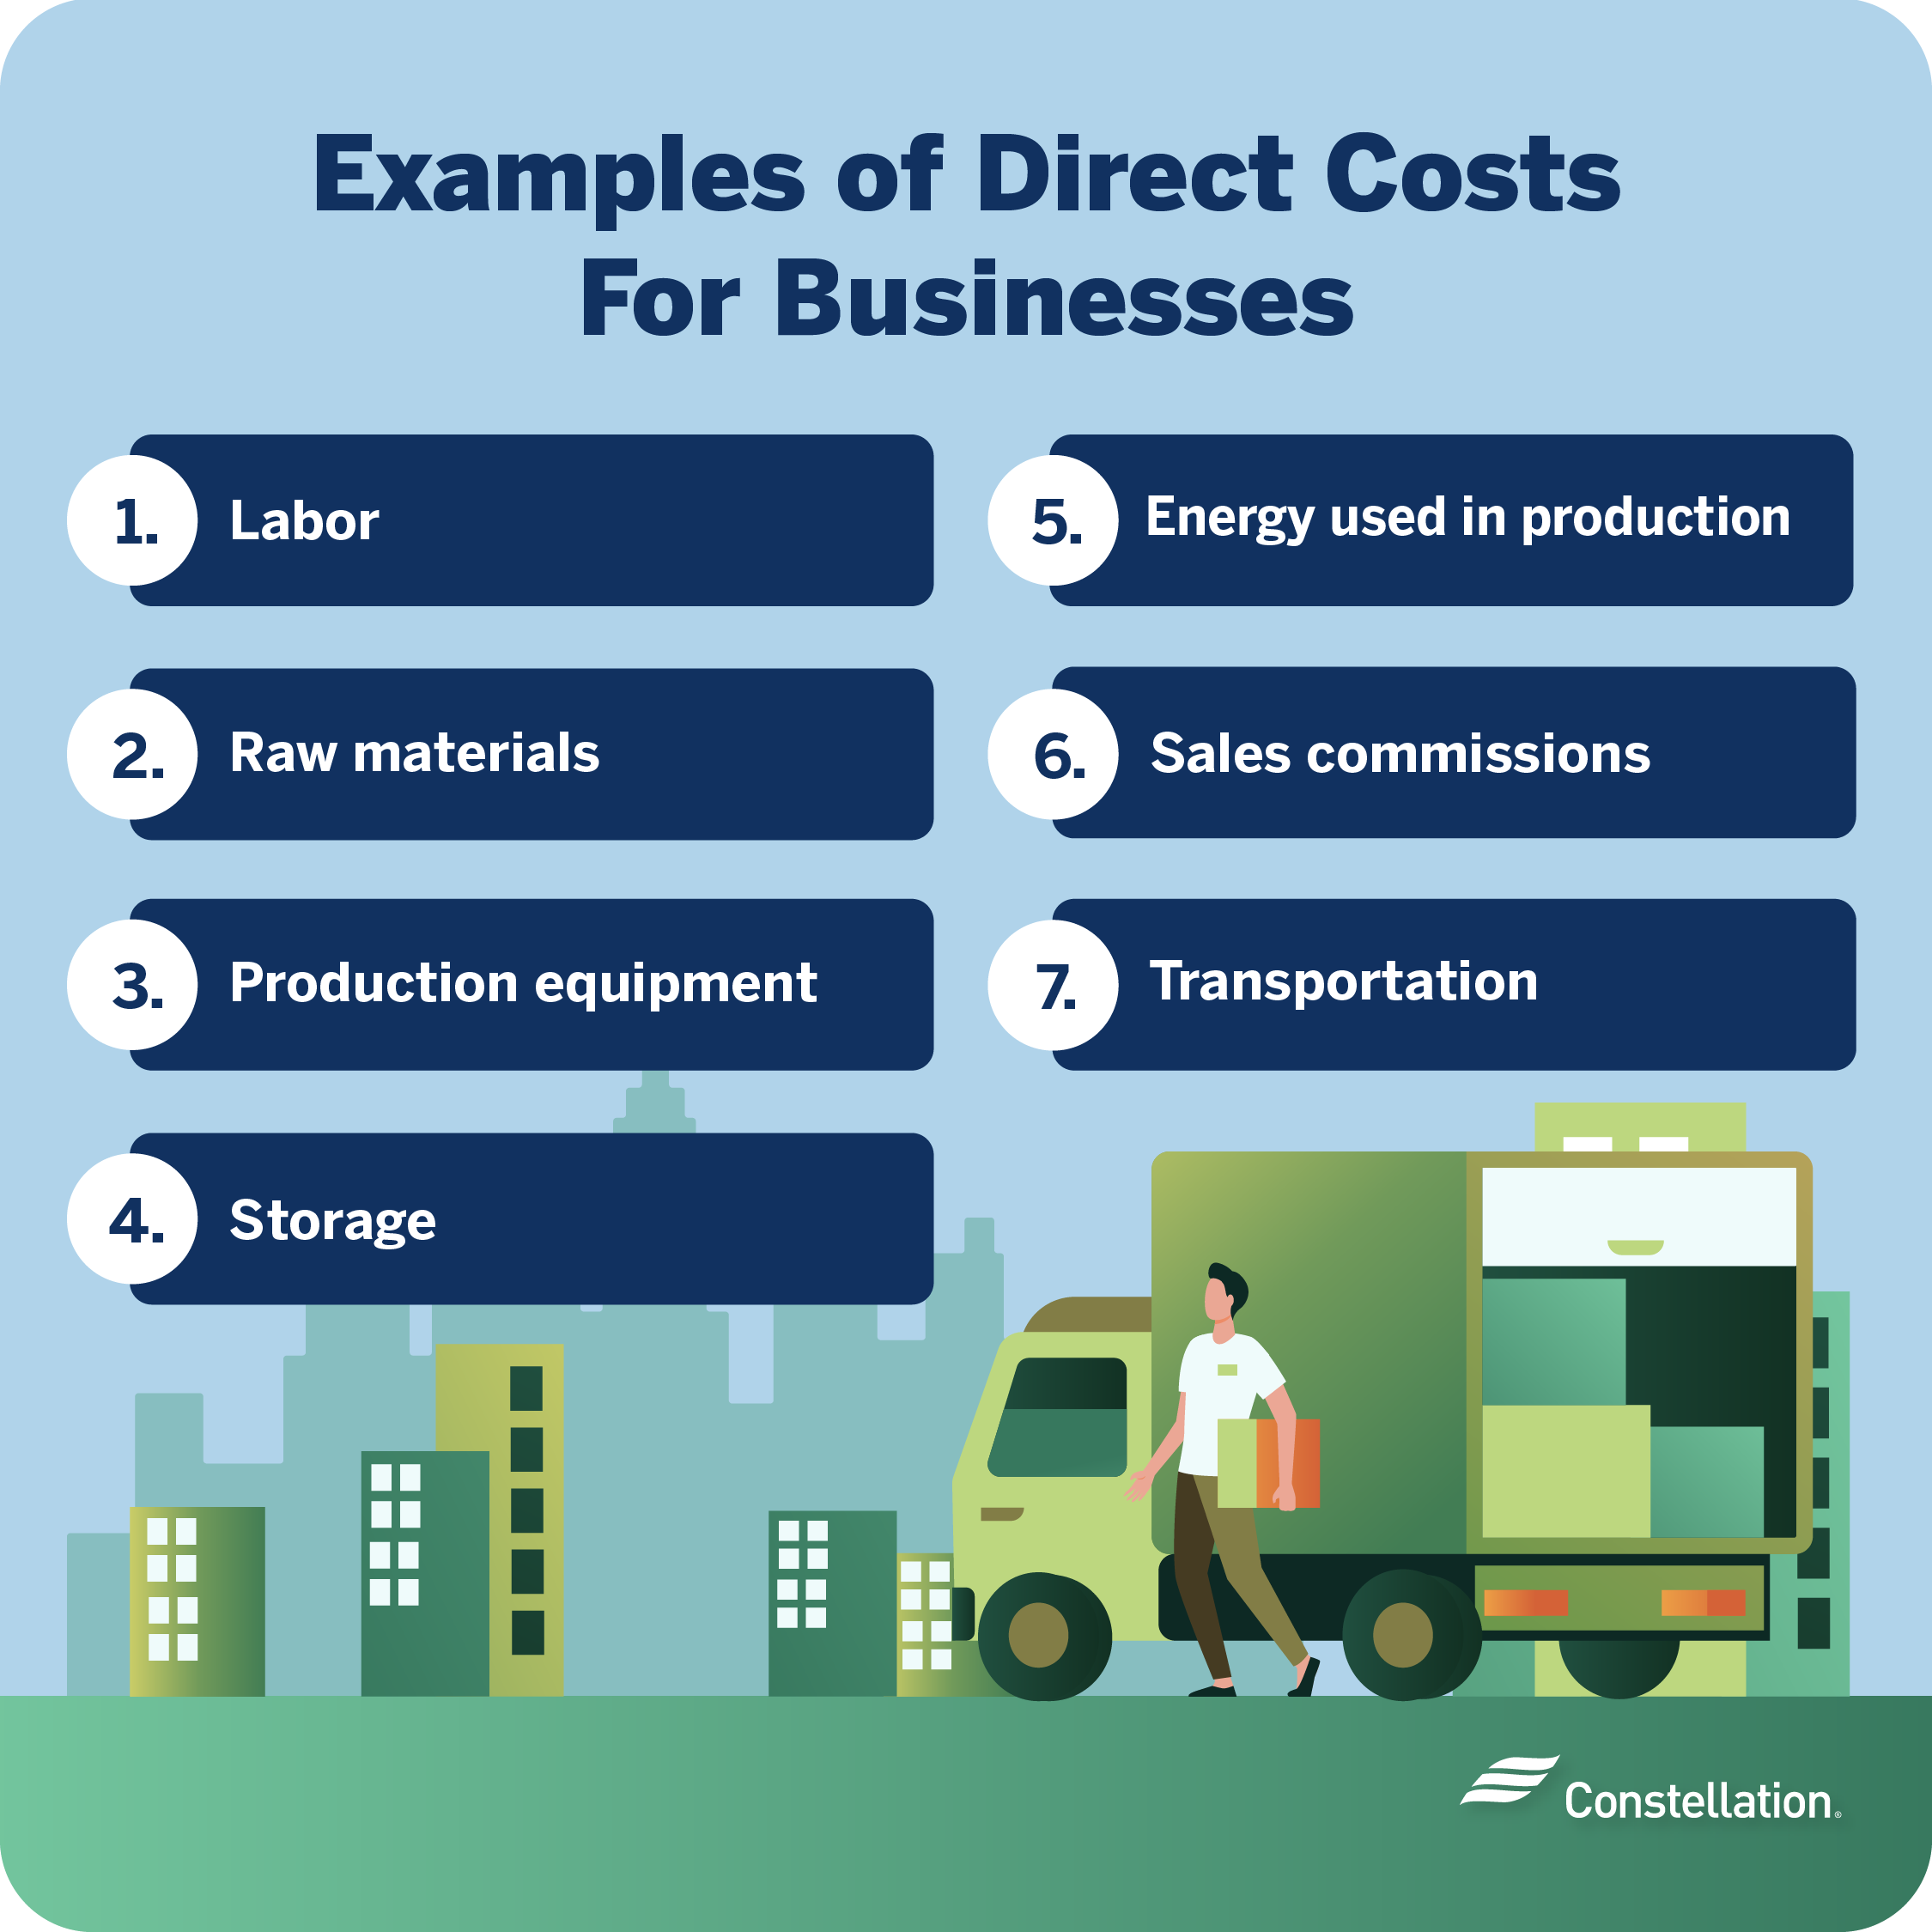 Examples of direct costs for businesses.